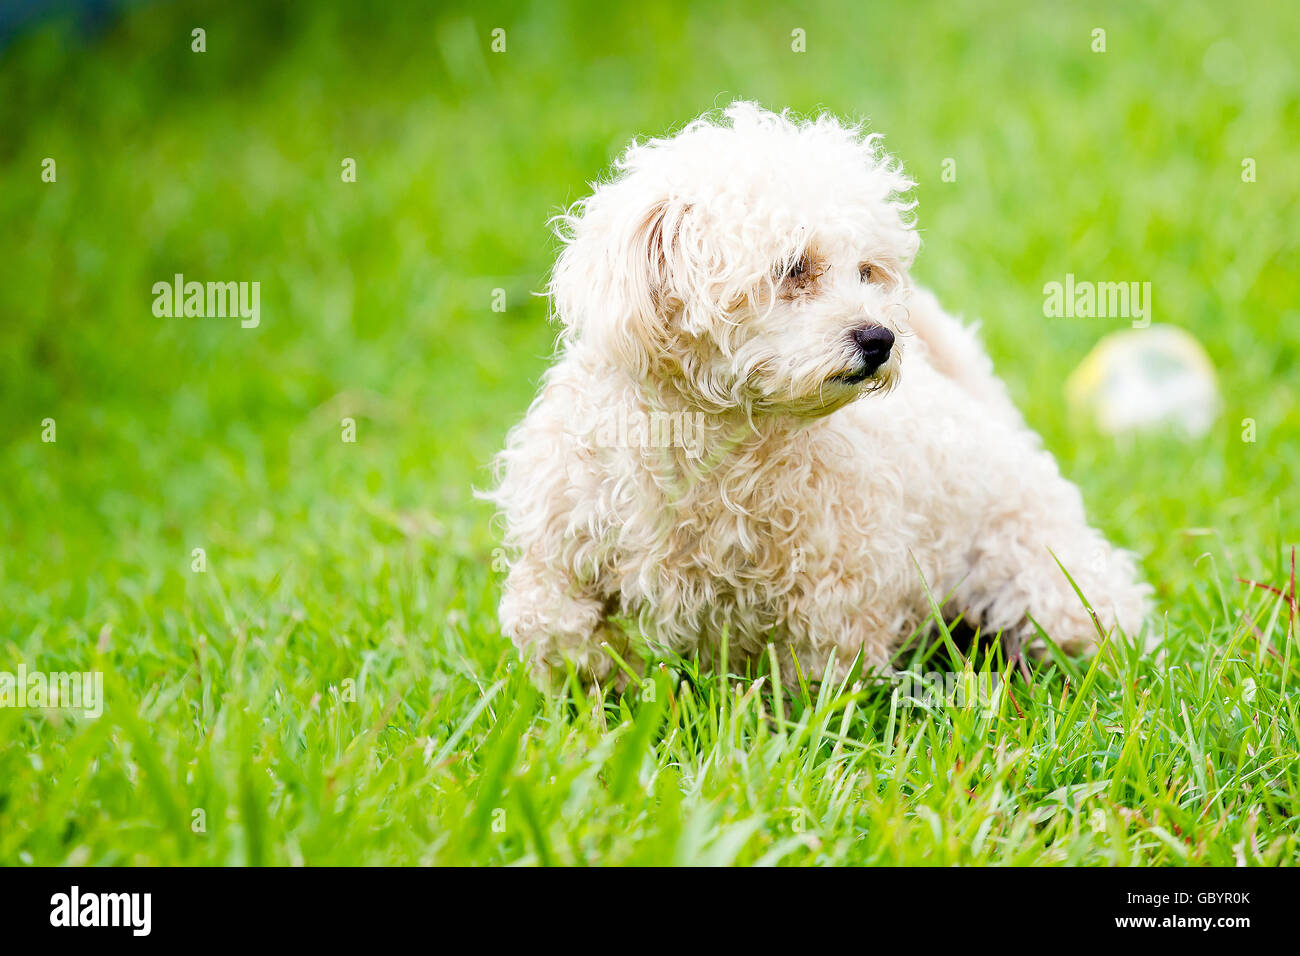 The dogs running on Green grass seamless. Stock Photo